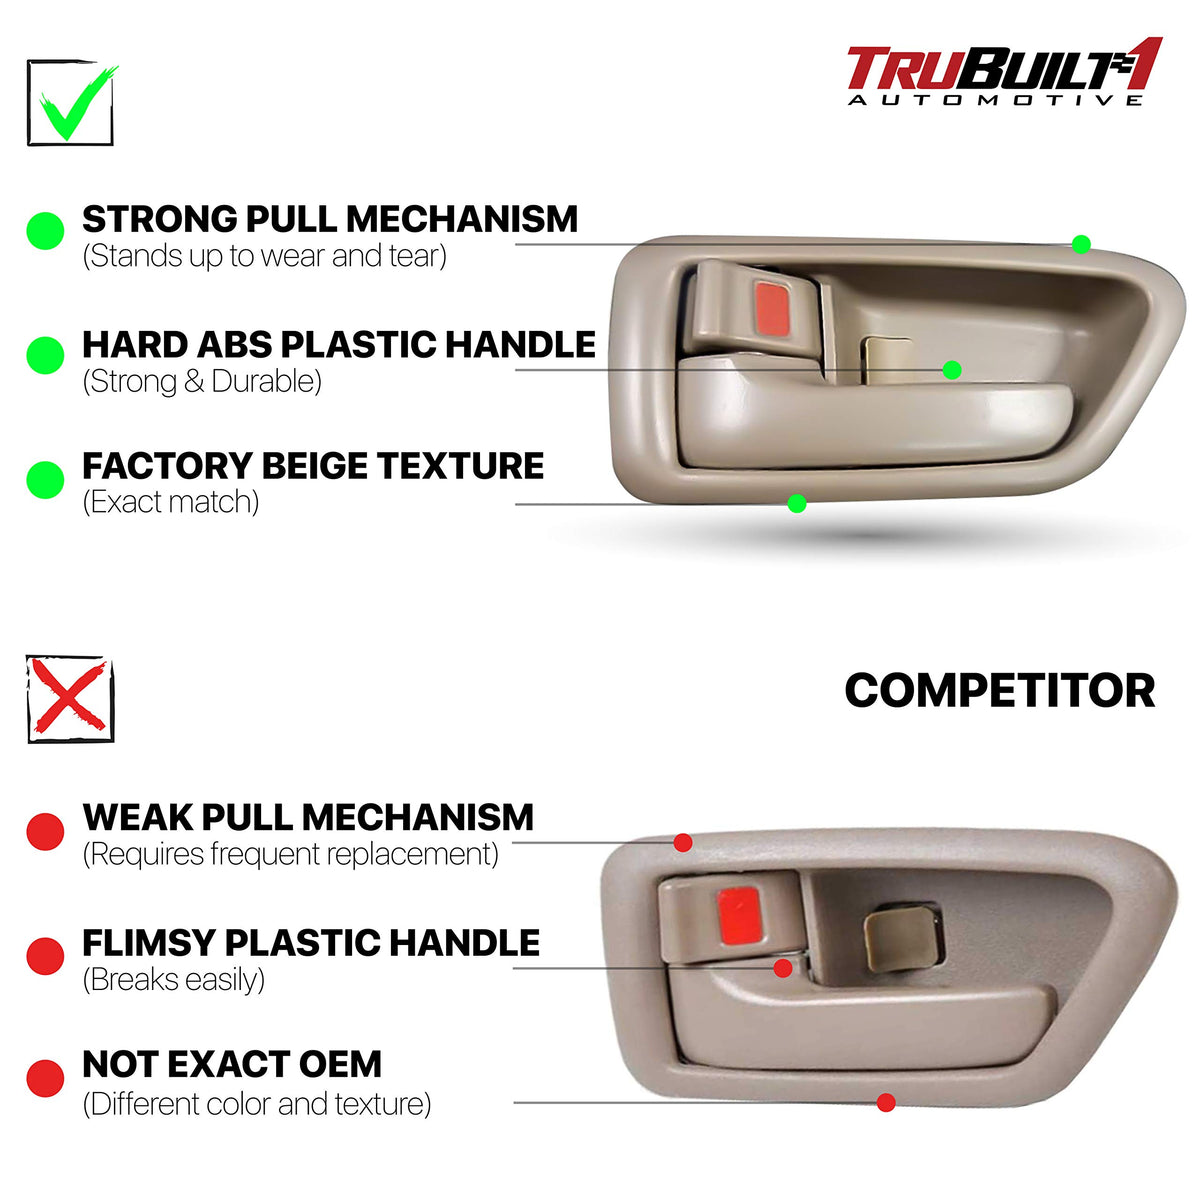 TRUBUILT1 AUTOMOTIVE Interior Door Handle, Left Driver Side - Compatible with 1997-2001 Toyota Camry - Beige (Ivory), Plastic - OEM 69206-AA010-E0, 69206AA010E0